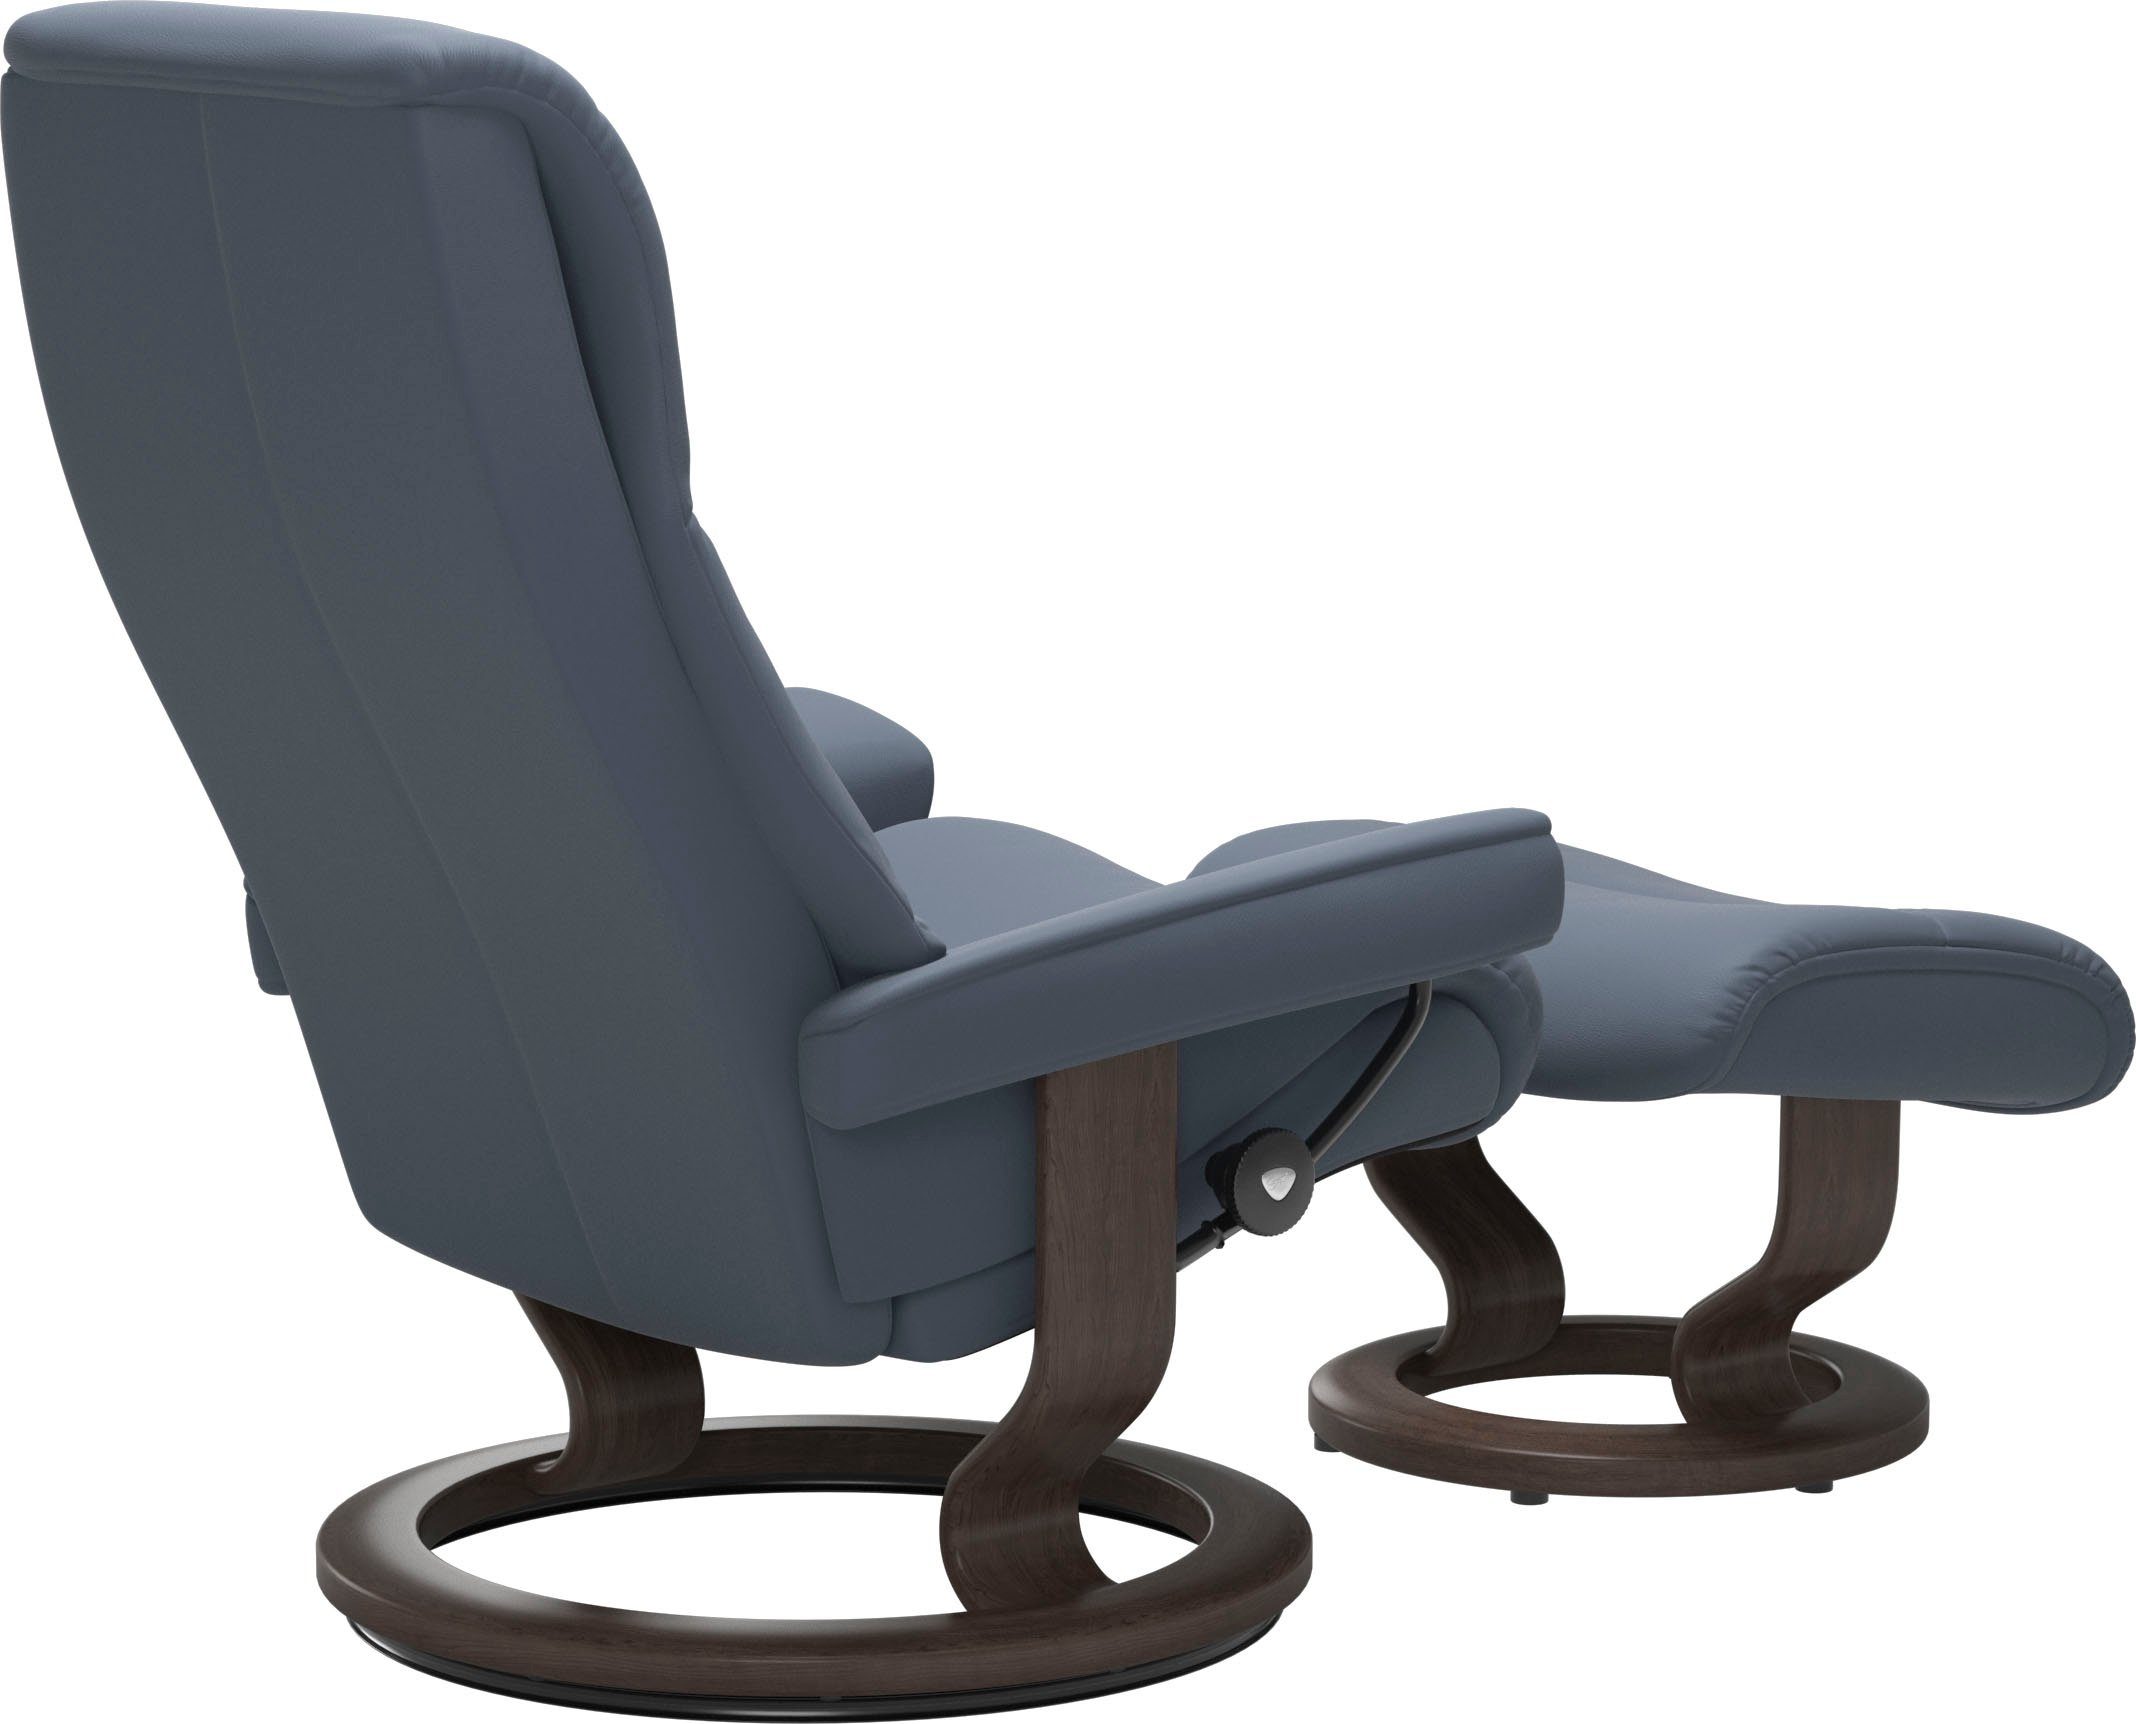 Stressless® Wenge Classic mit Größe M,Gestell Relaxsessel View, Base,